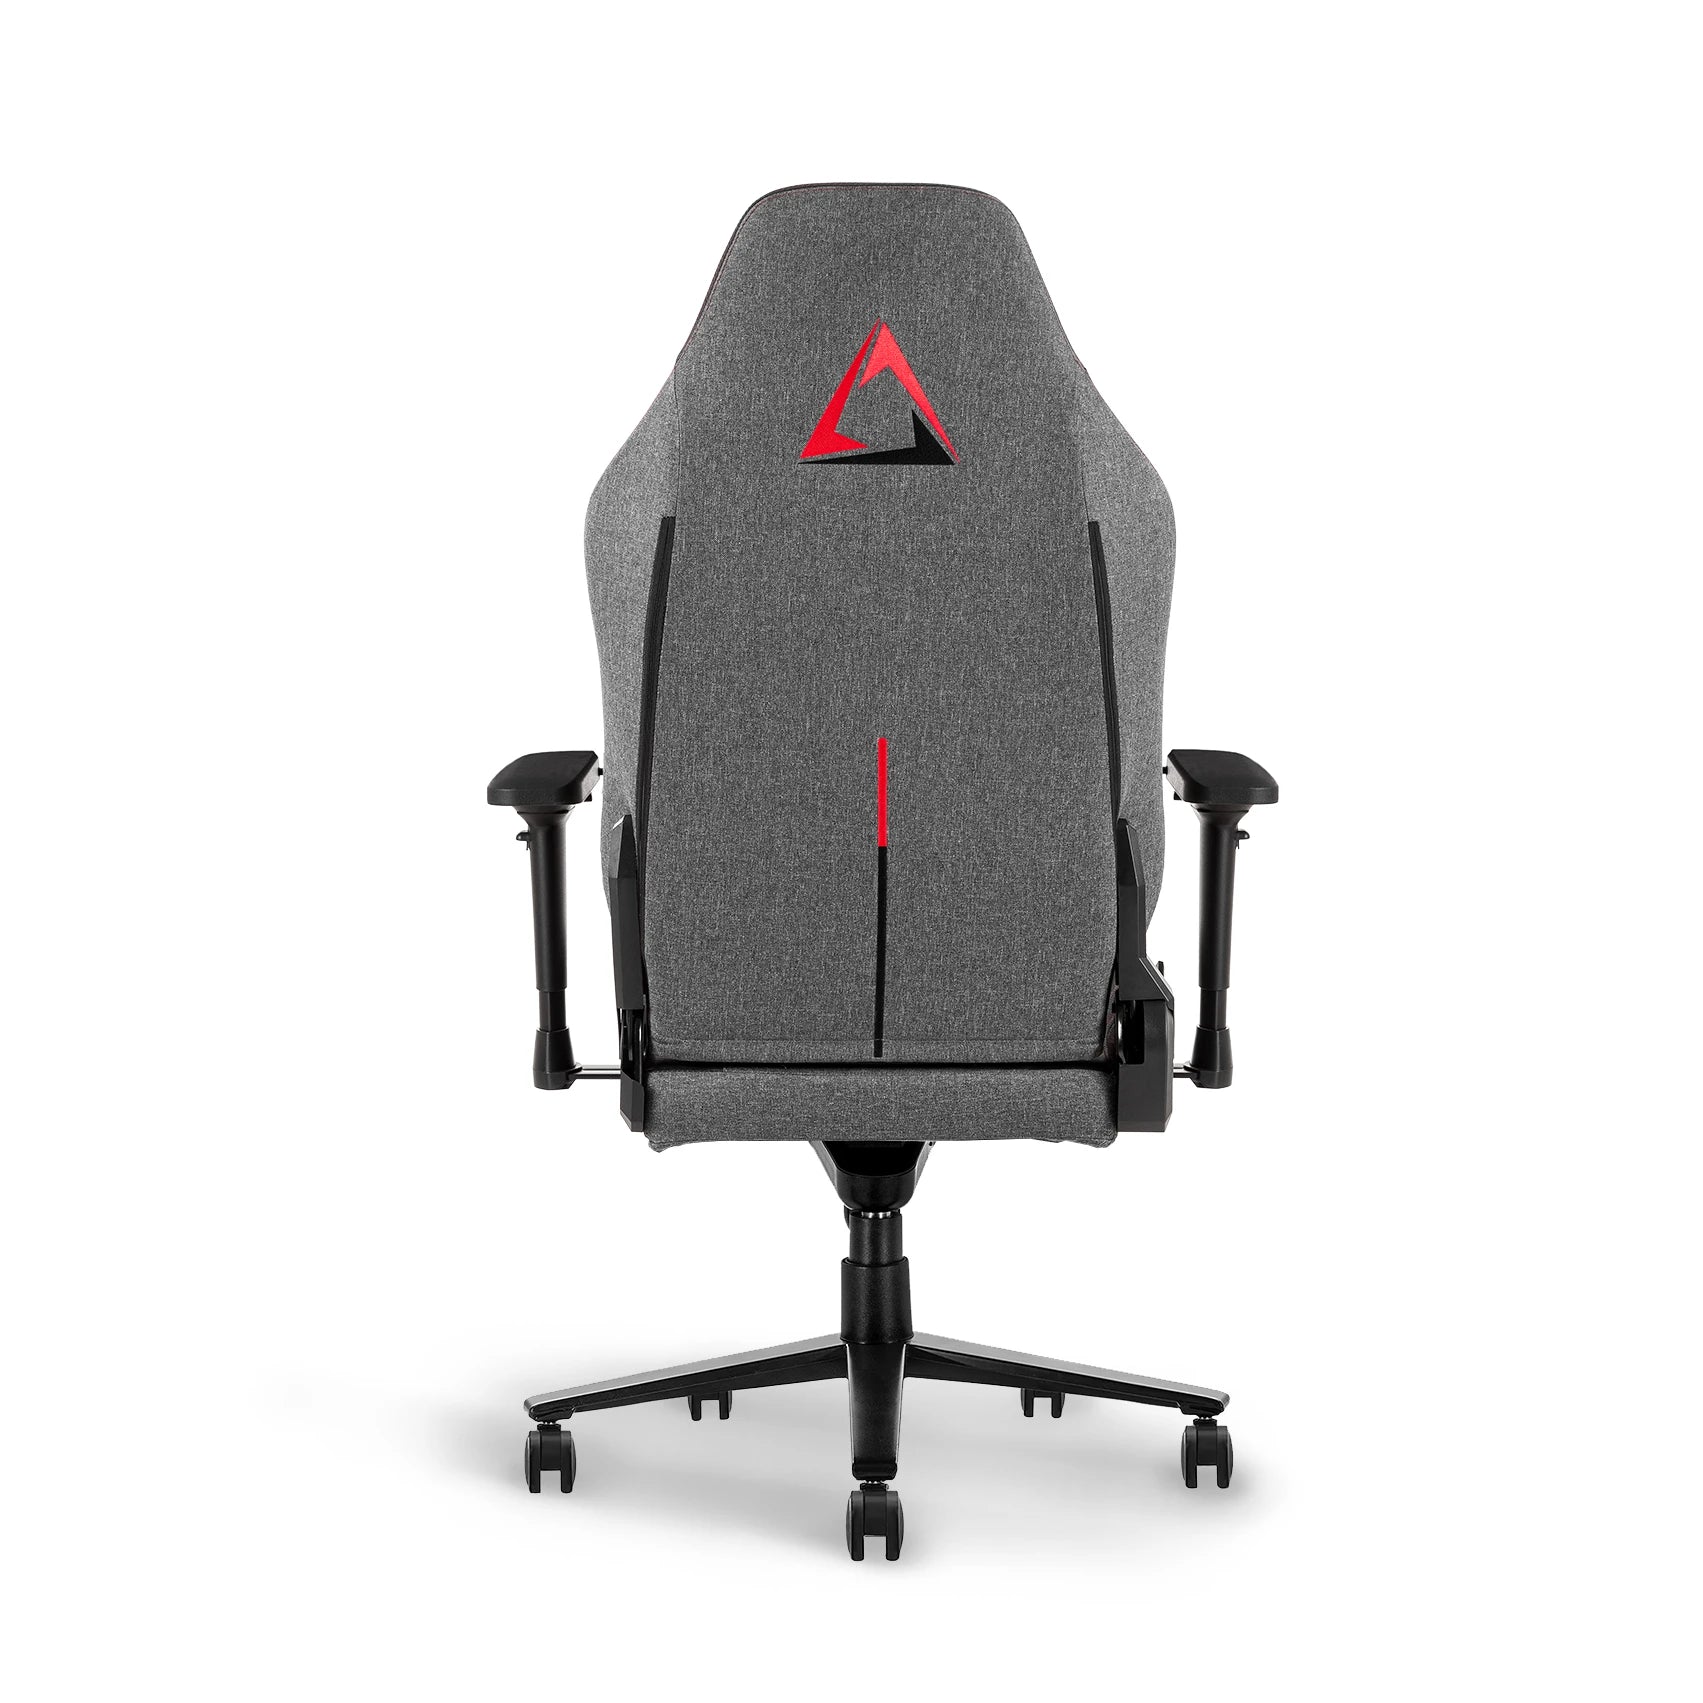 Back view of Heather grey gaming chair with distinctive red accent and brand emblem.